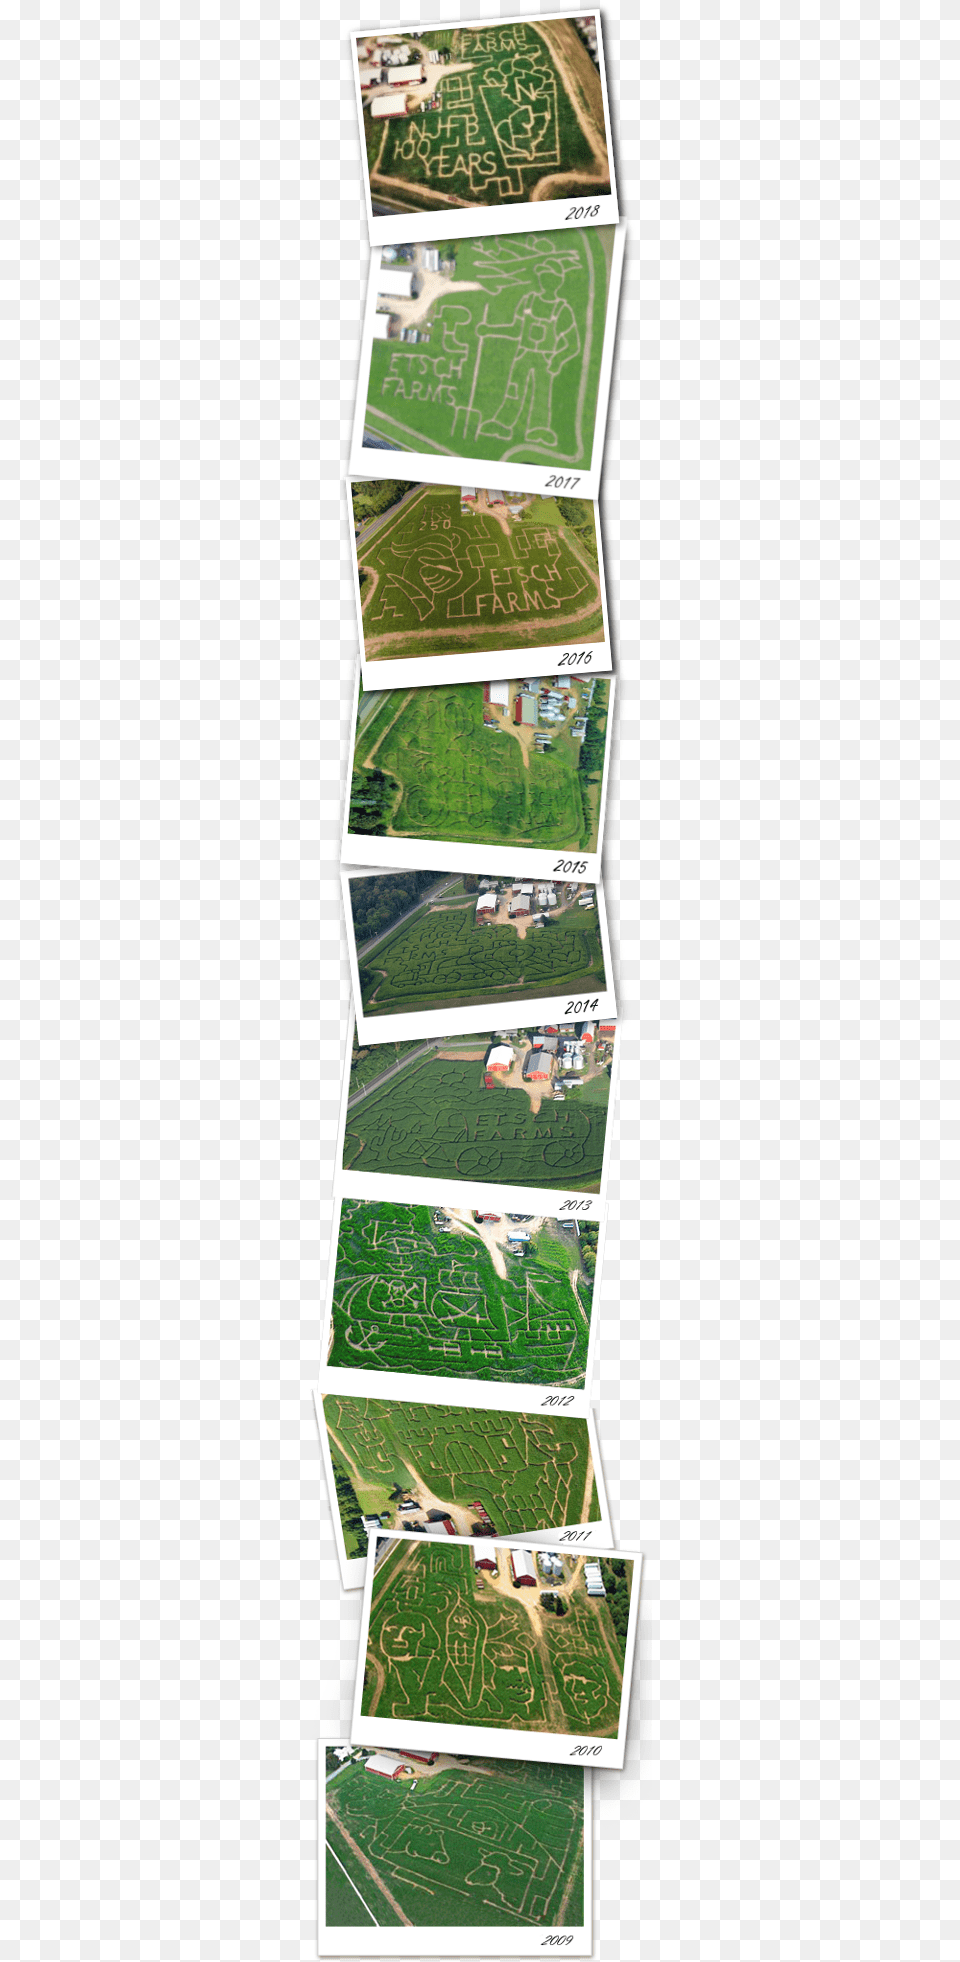 Lawn, Art, Collage, Field, Outdoors Png Image